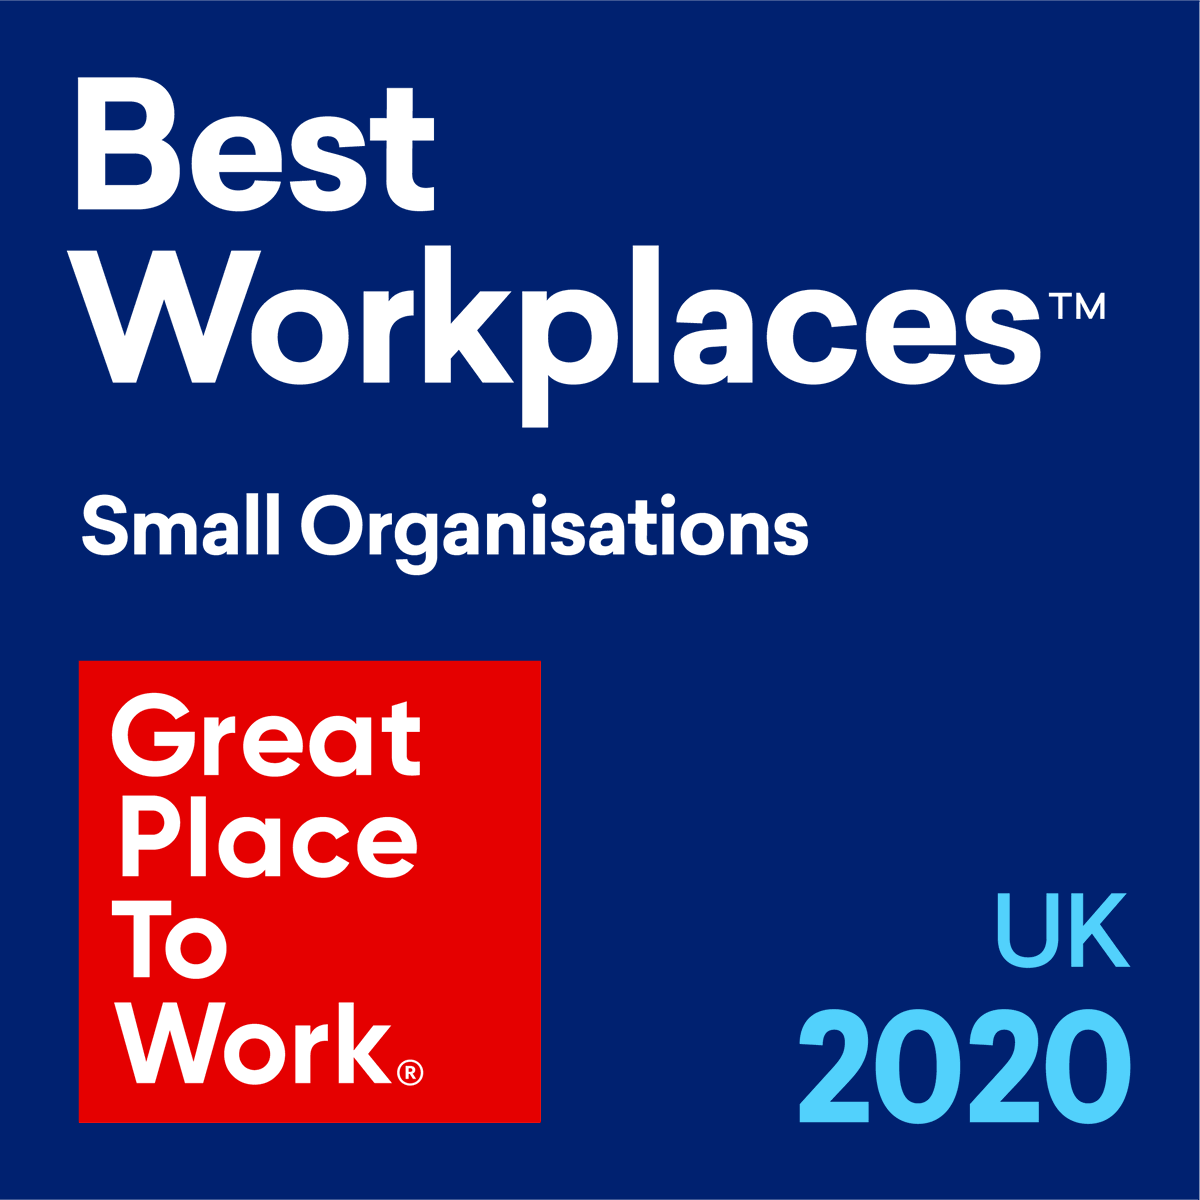 Gearset is now officially one of the best places to work in the UK